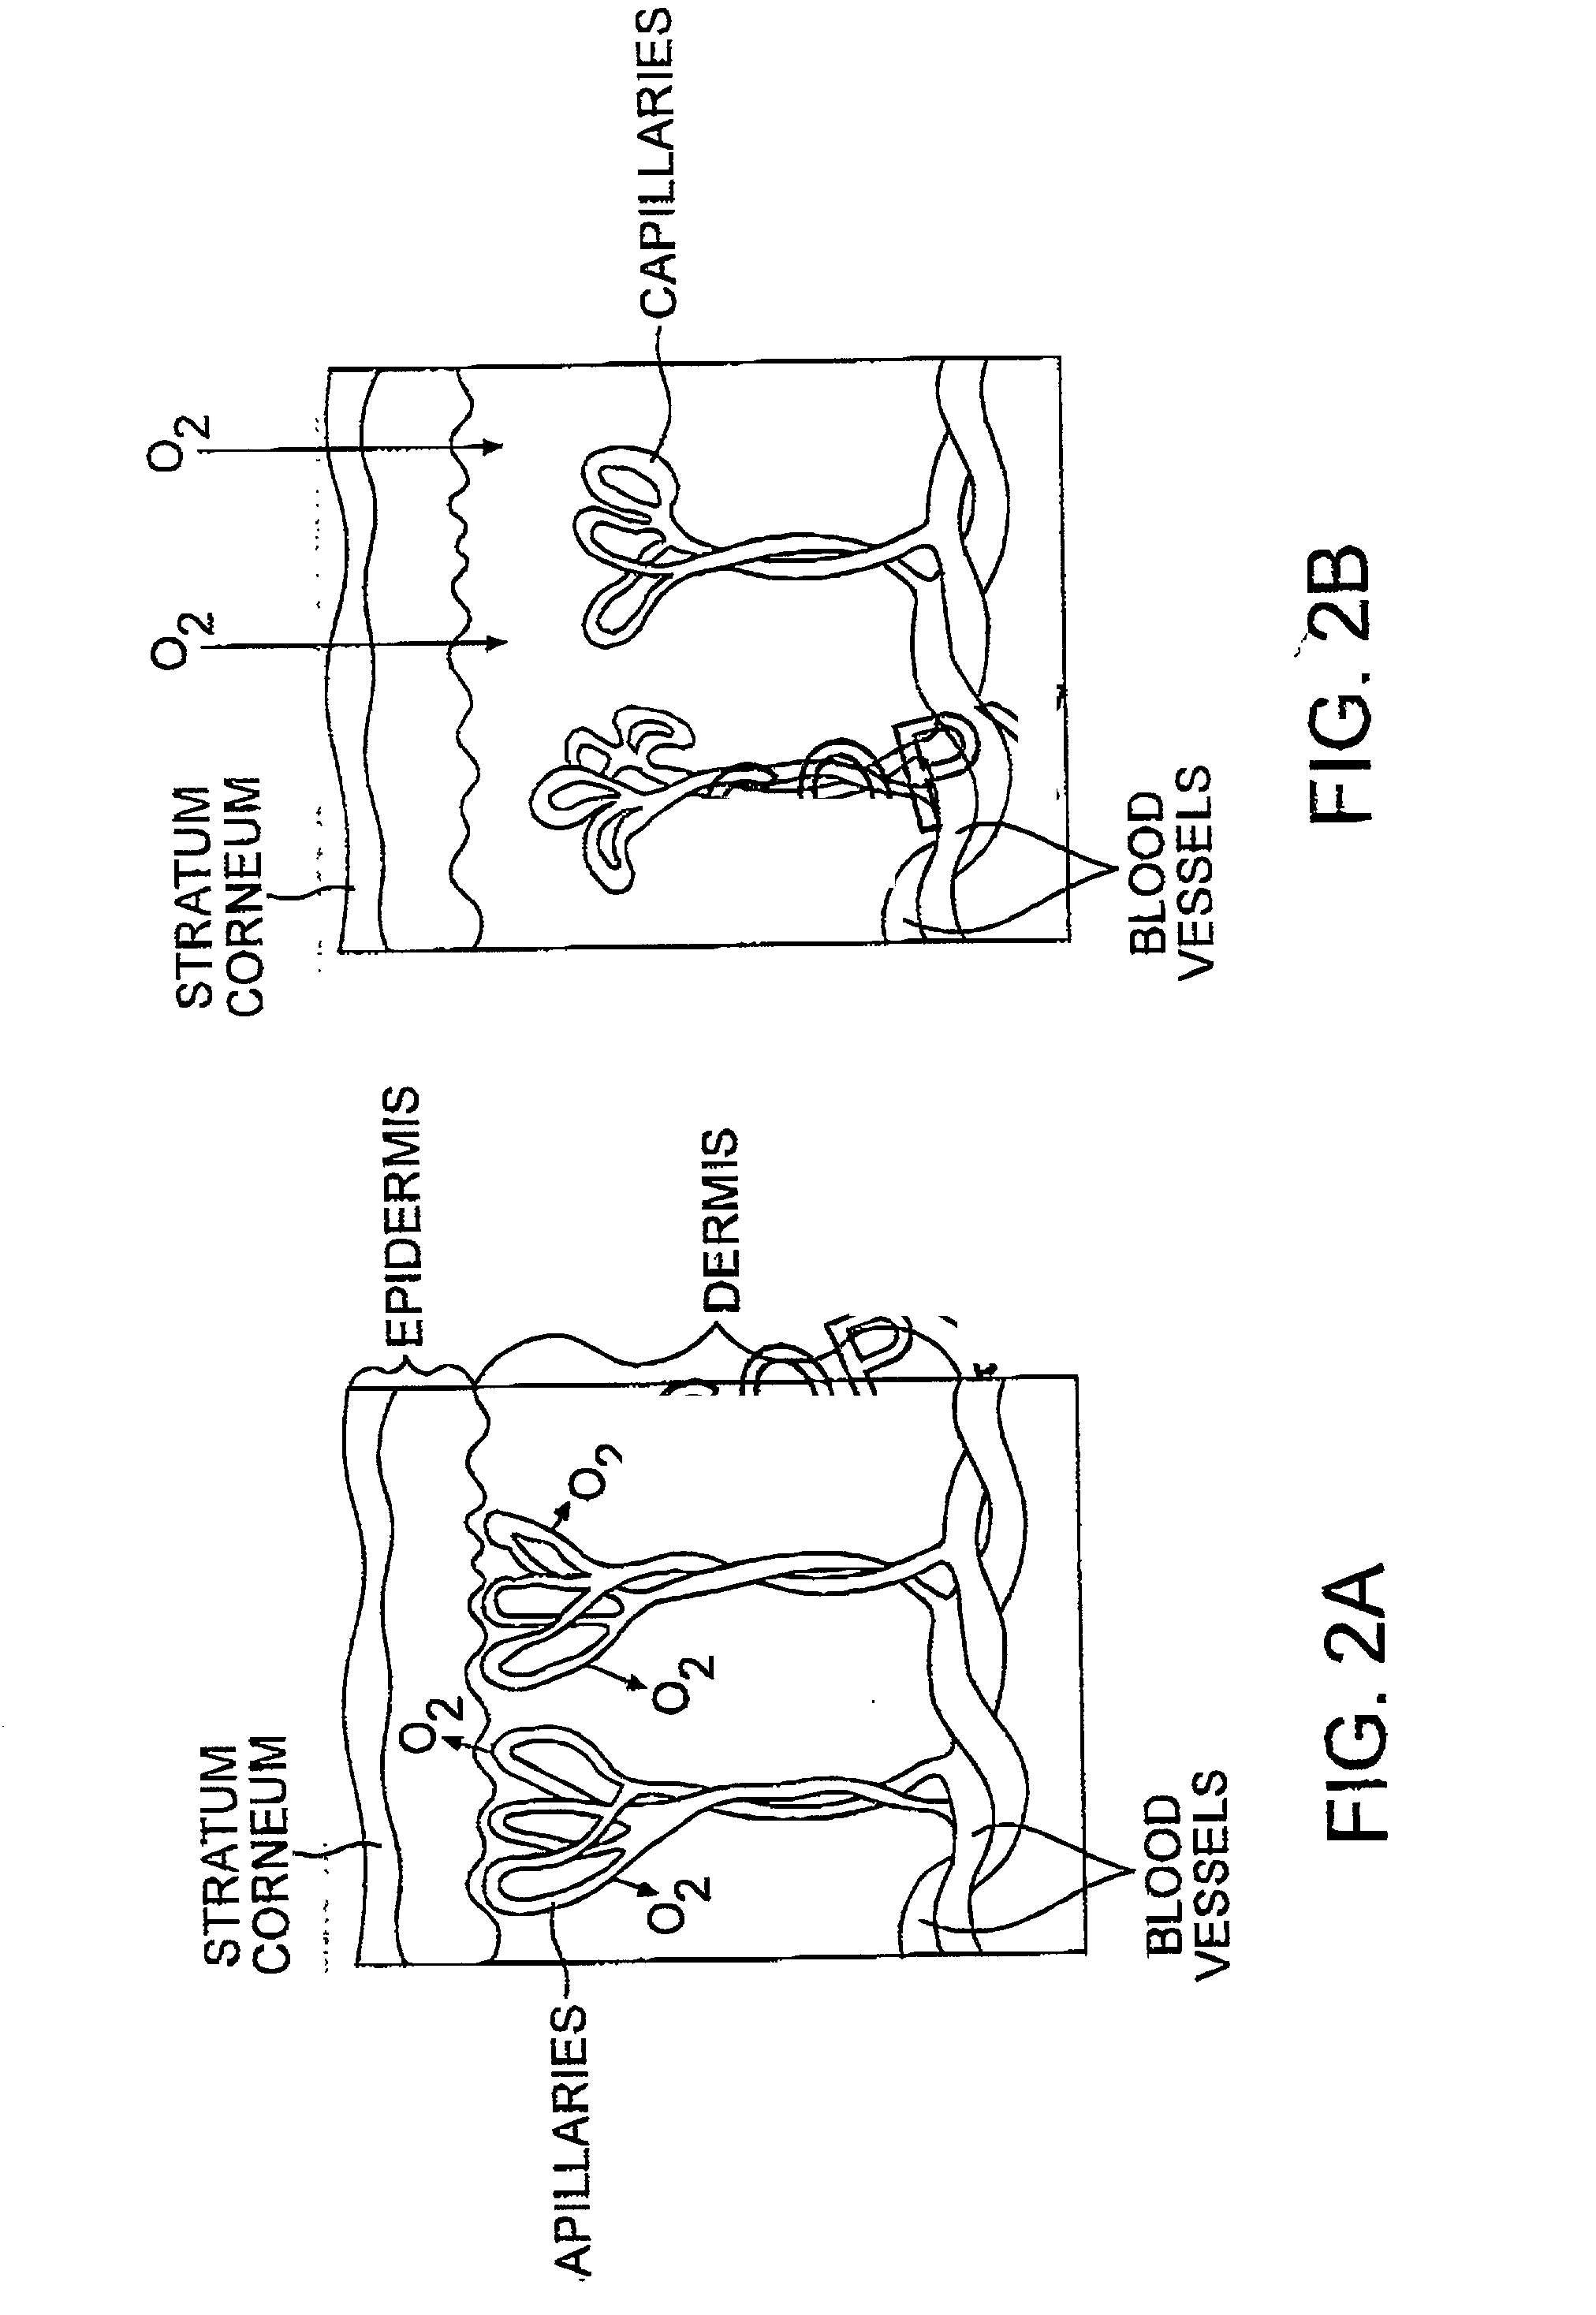 Compositions and method of tissue superoxygenation